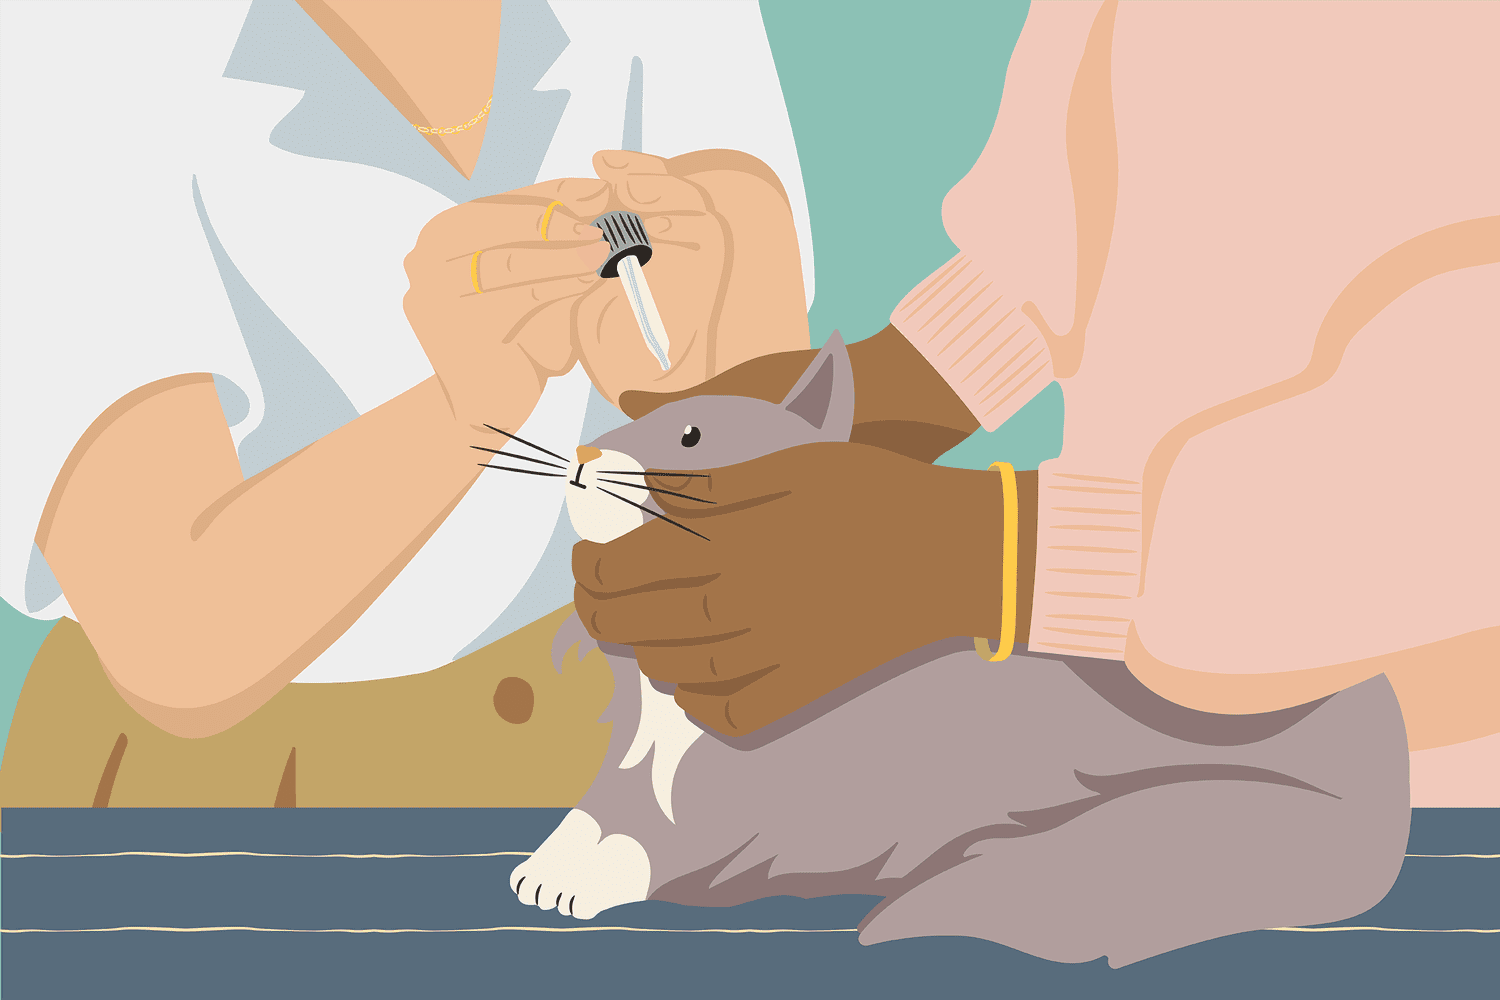 cat getting eye drops, one person holding his face and the other administering the drops